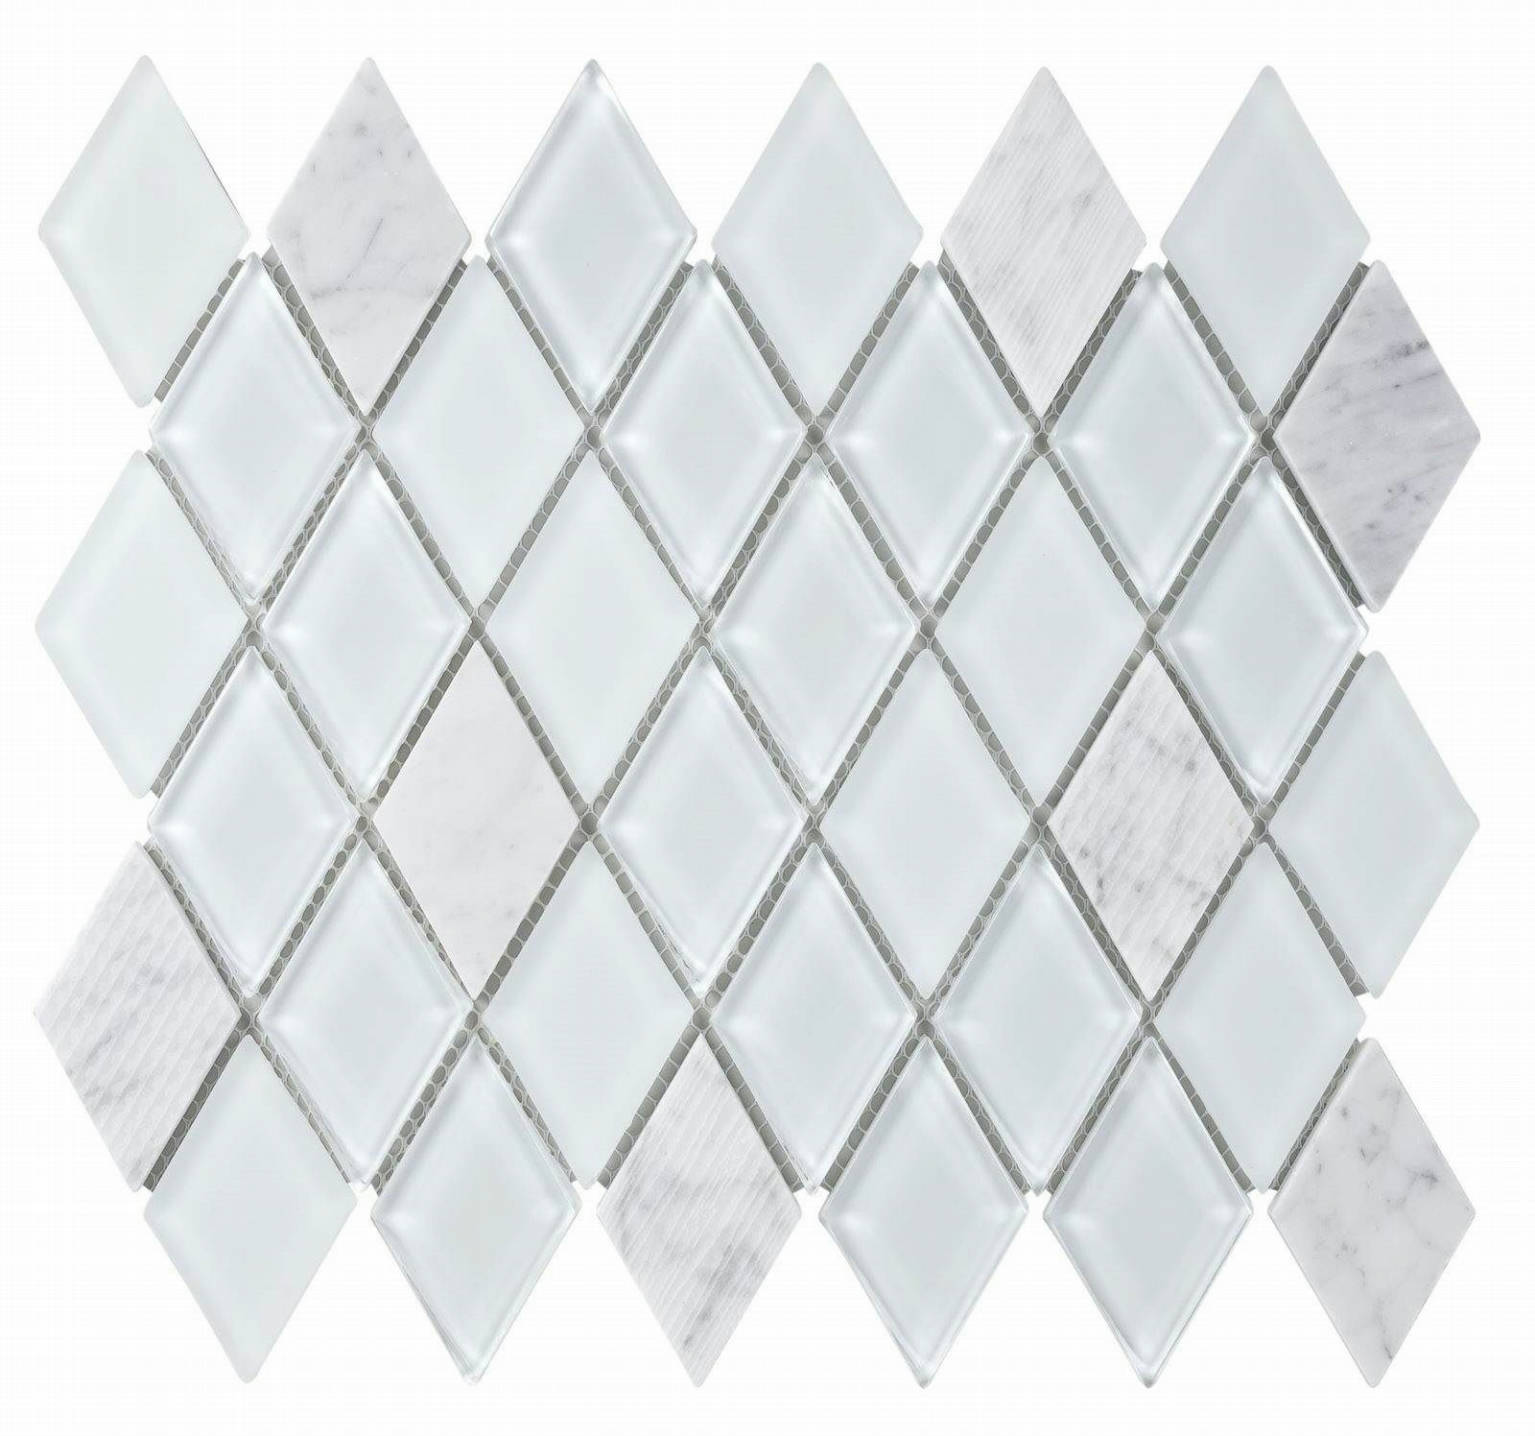 02D | Stones & More | Finest selection of Mosaics, Glass, Tile and Stone